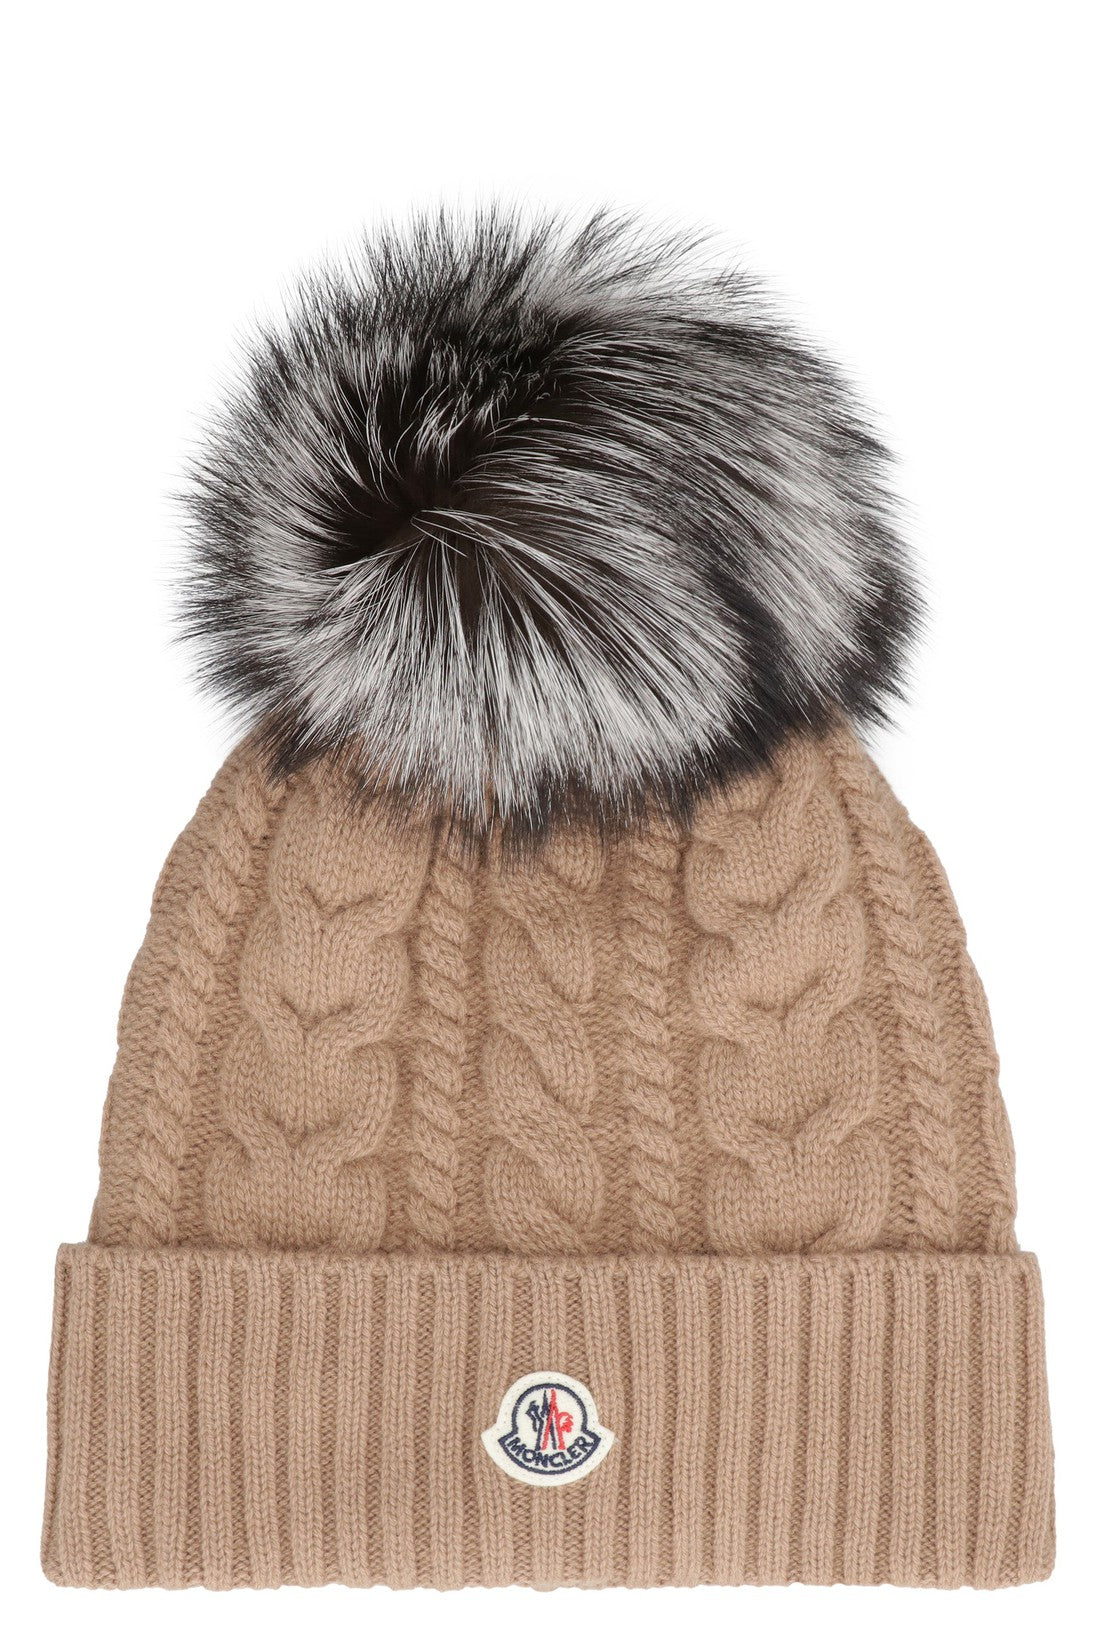 Moncler Grenoble-OUTLET-SALE-Knitted wool hat with pom-pom-ARCHIVIST